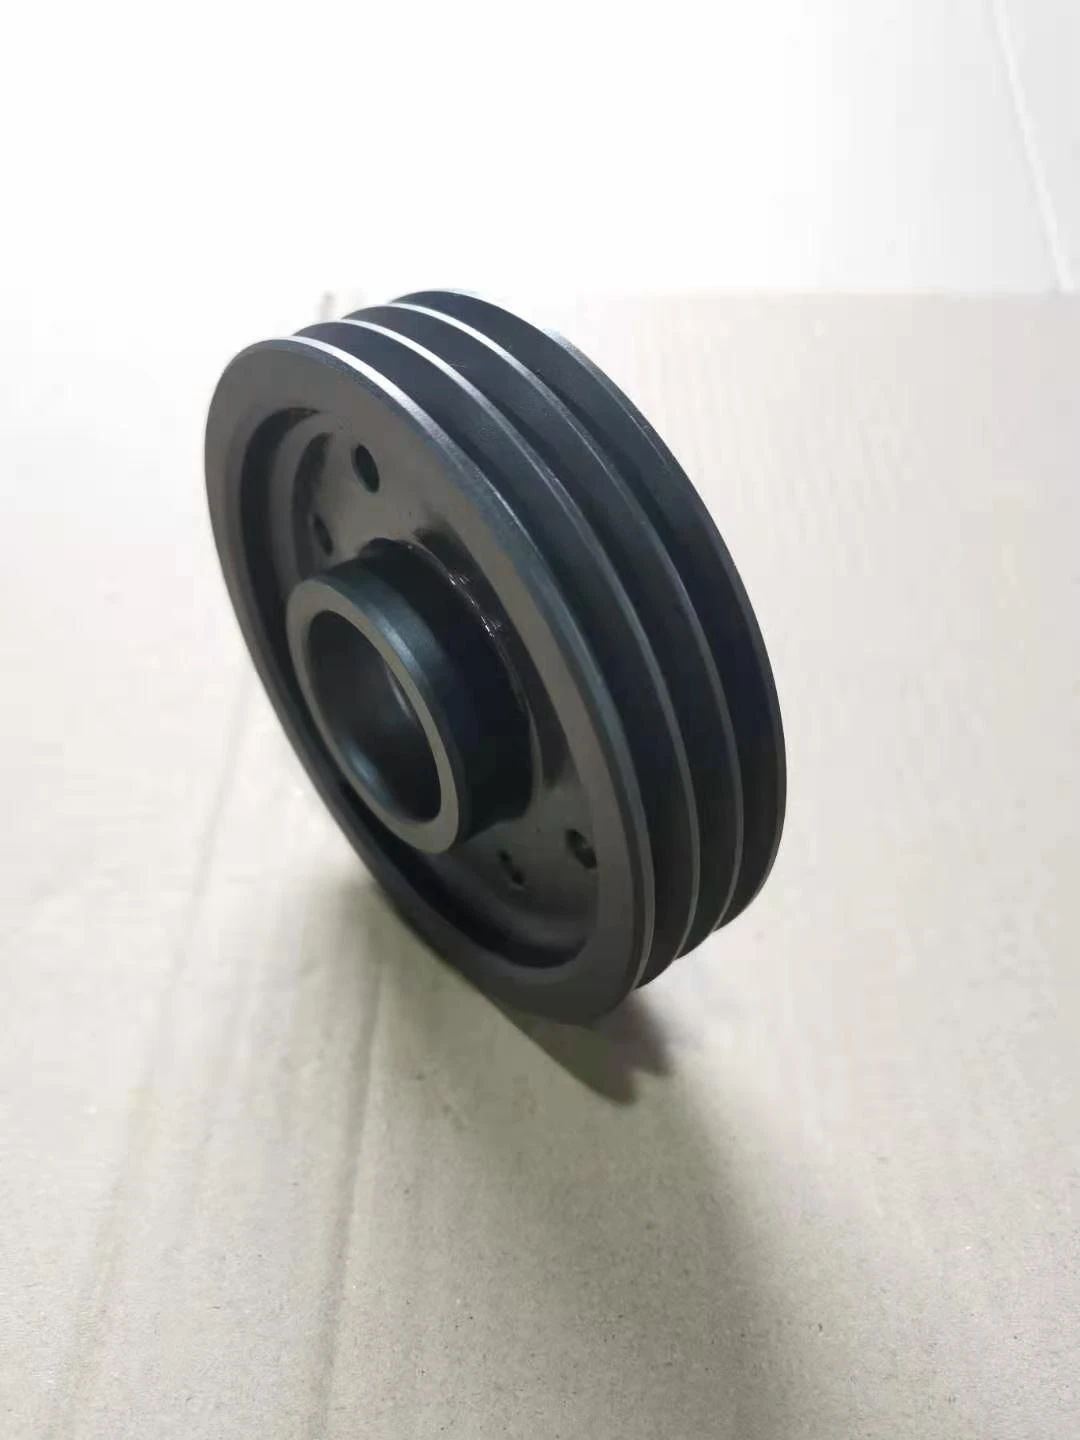 Hot product pulley phosphatedr cast iron V belt pulley